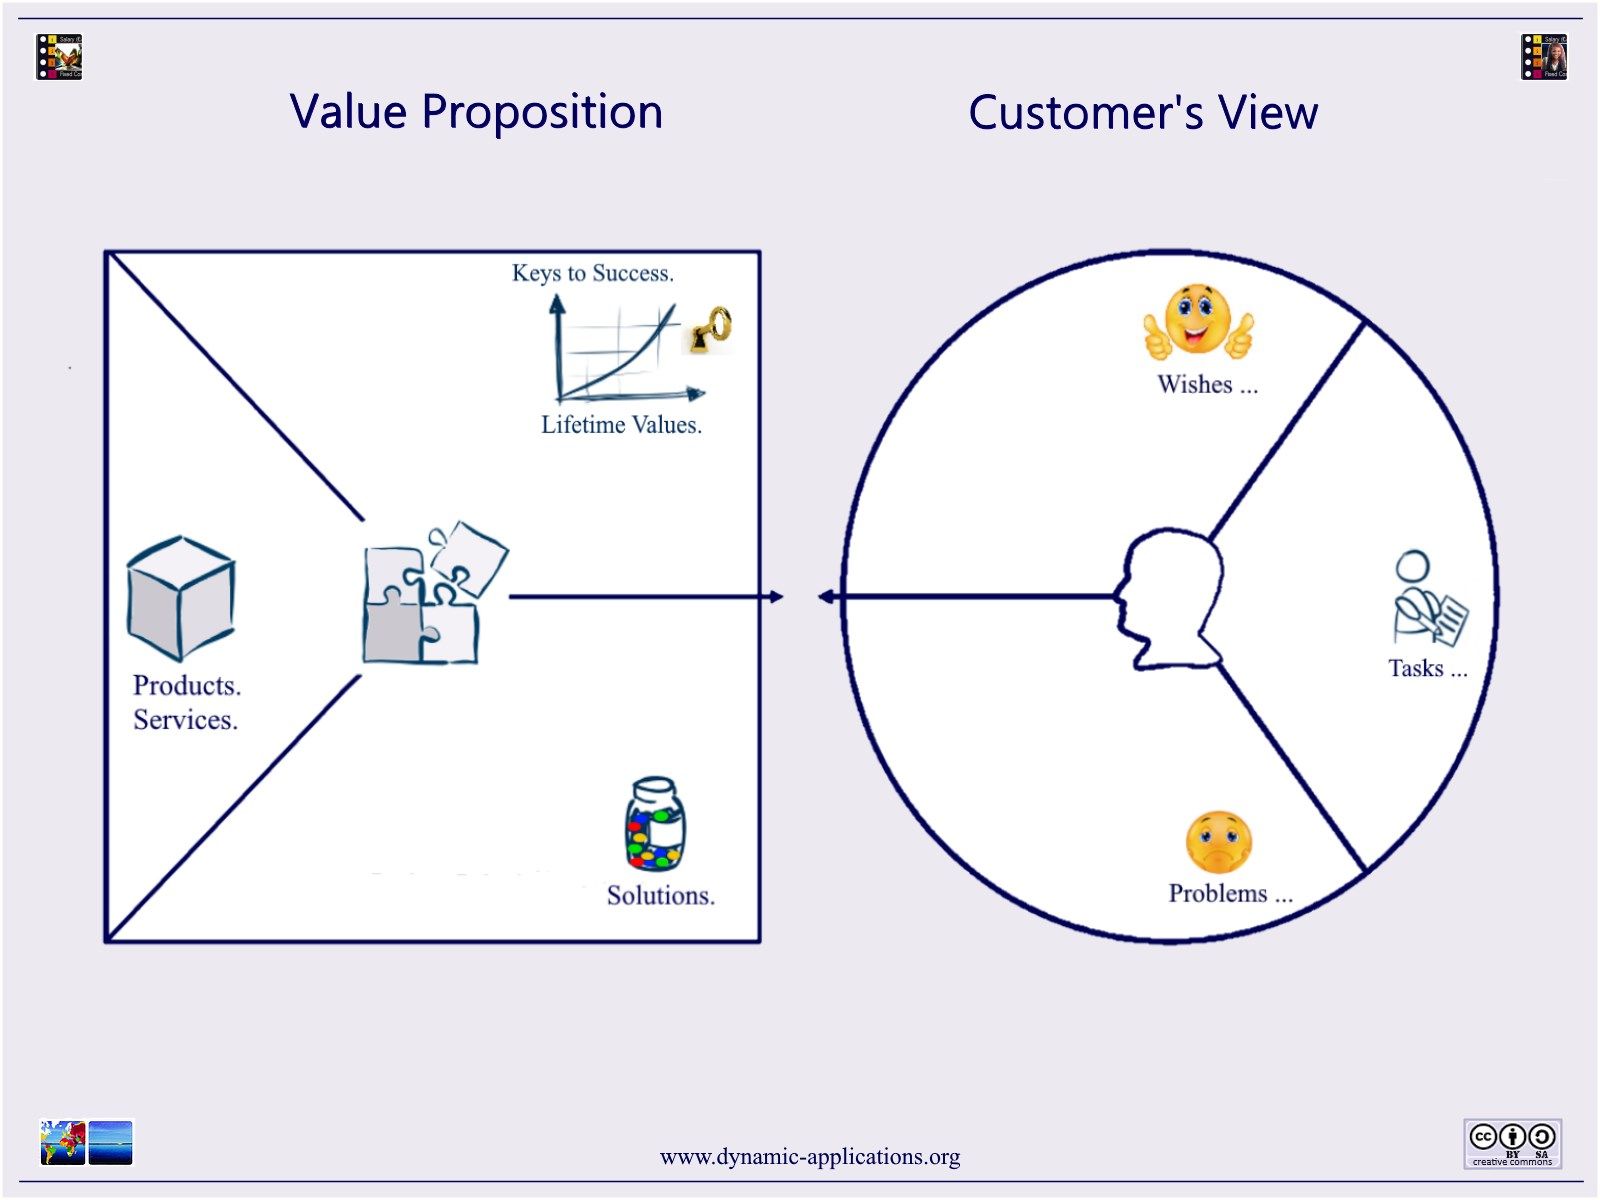 Value Proposition Canvas. Included with MS Office Folder (Extras Menu).